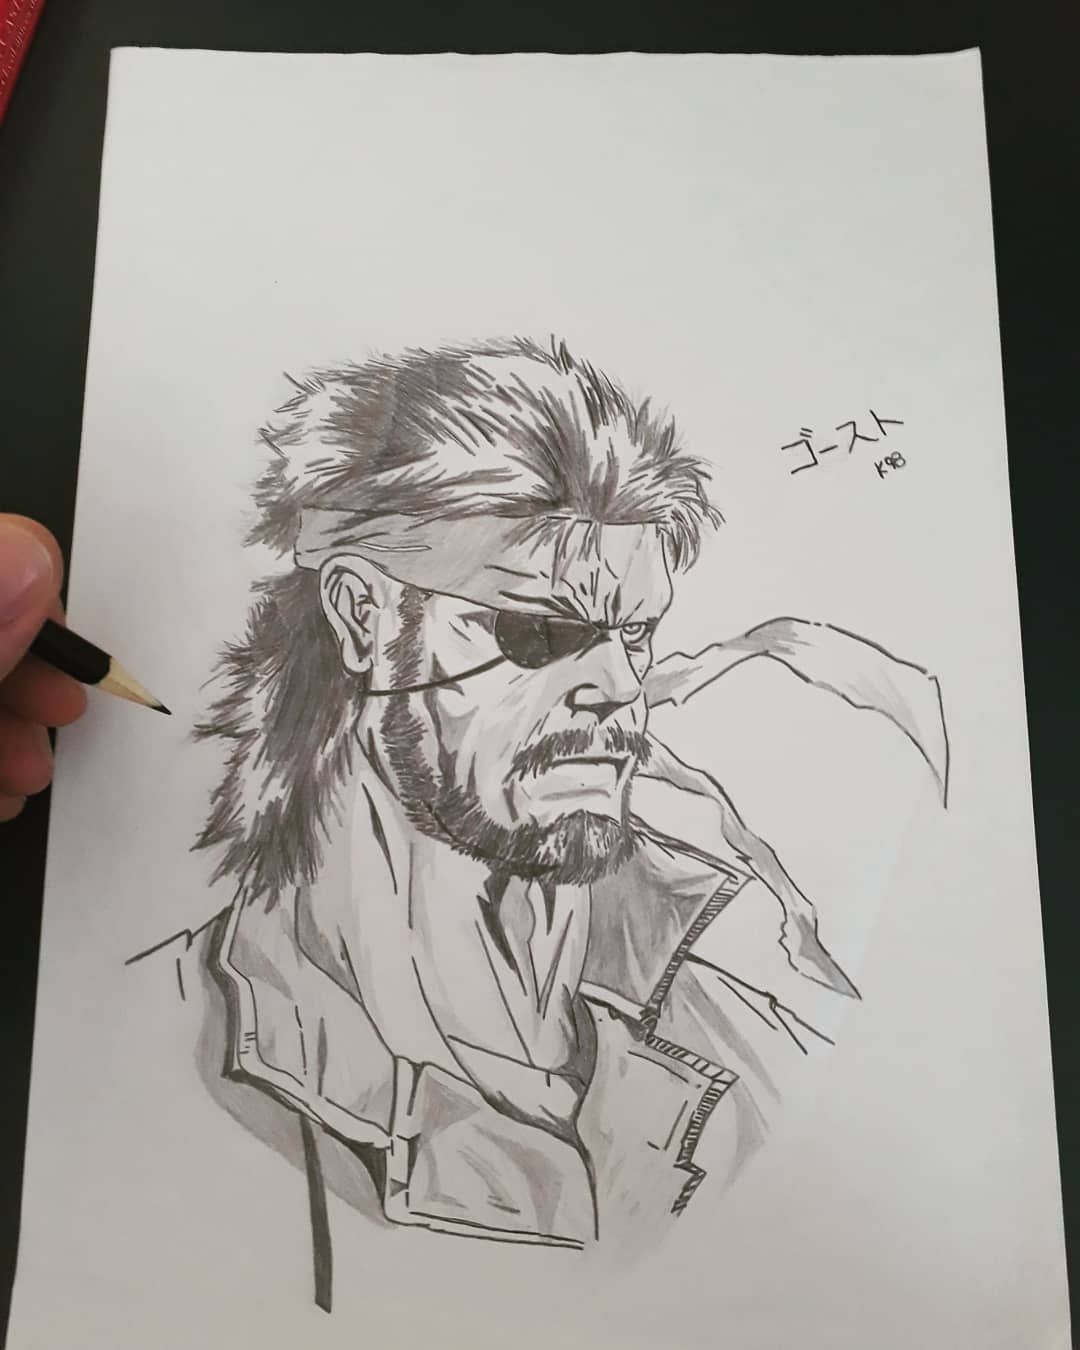 Solid Snake screenshots, images and pictures - Comic Vine